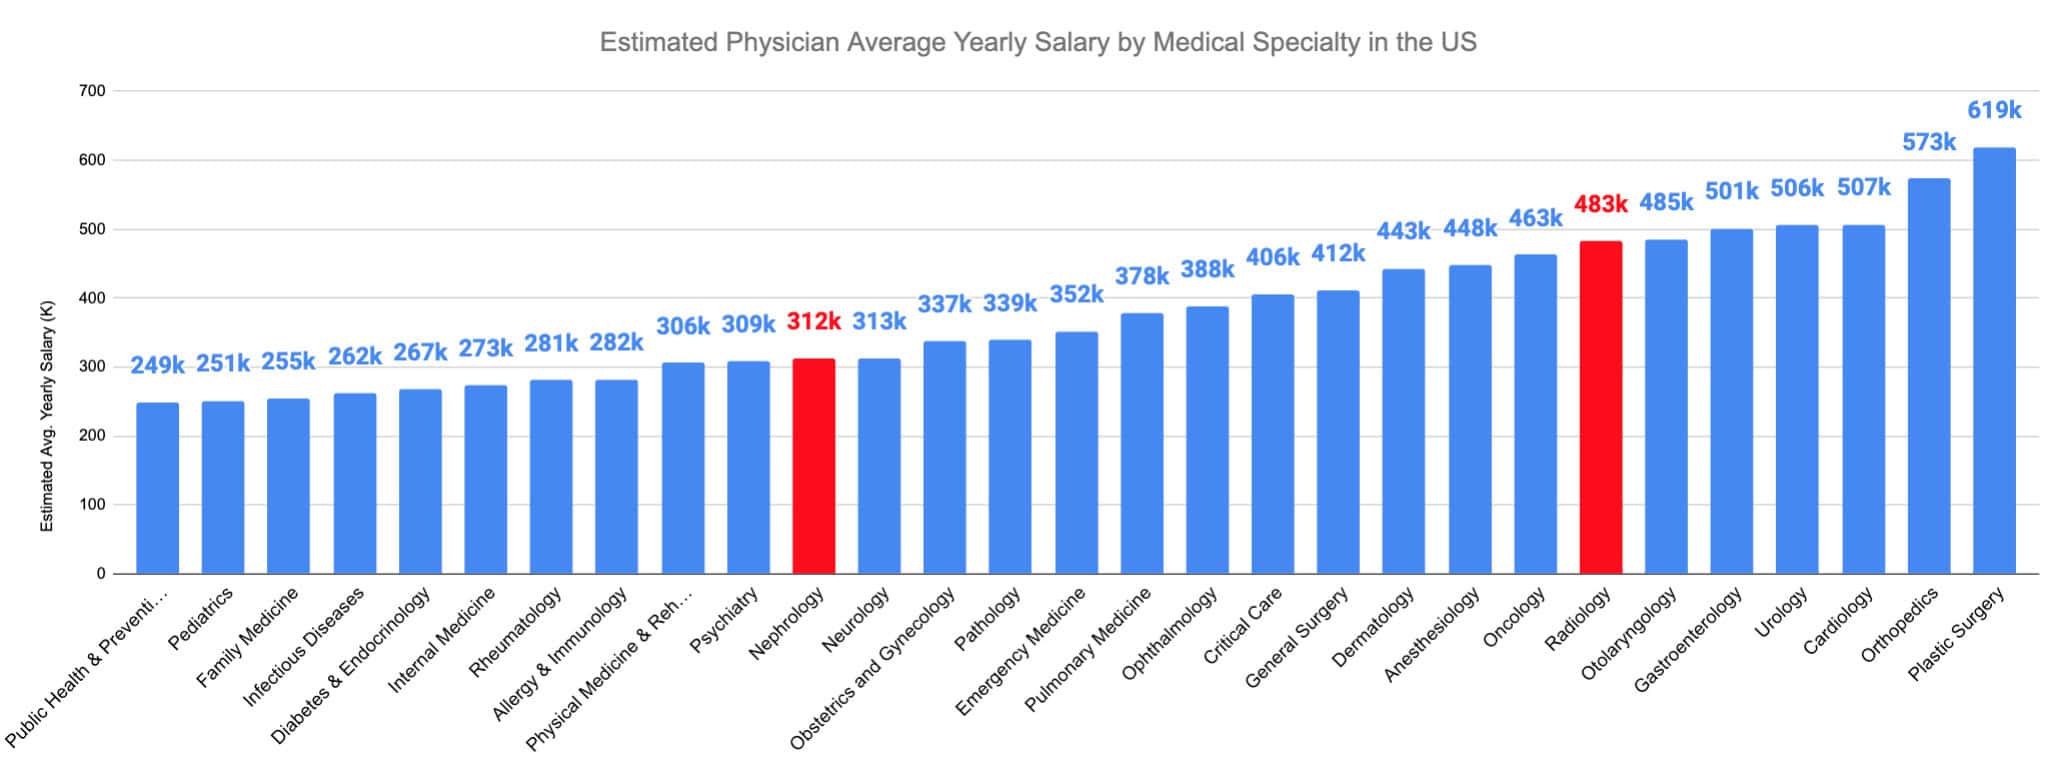 Radiology vs. Nephrology Estimated Physician Average Yearly Salary by Medical Specialty in the US